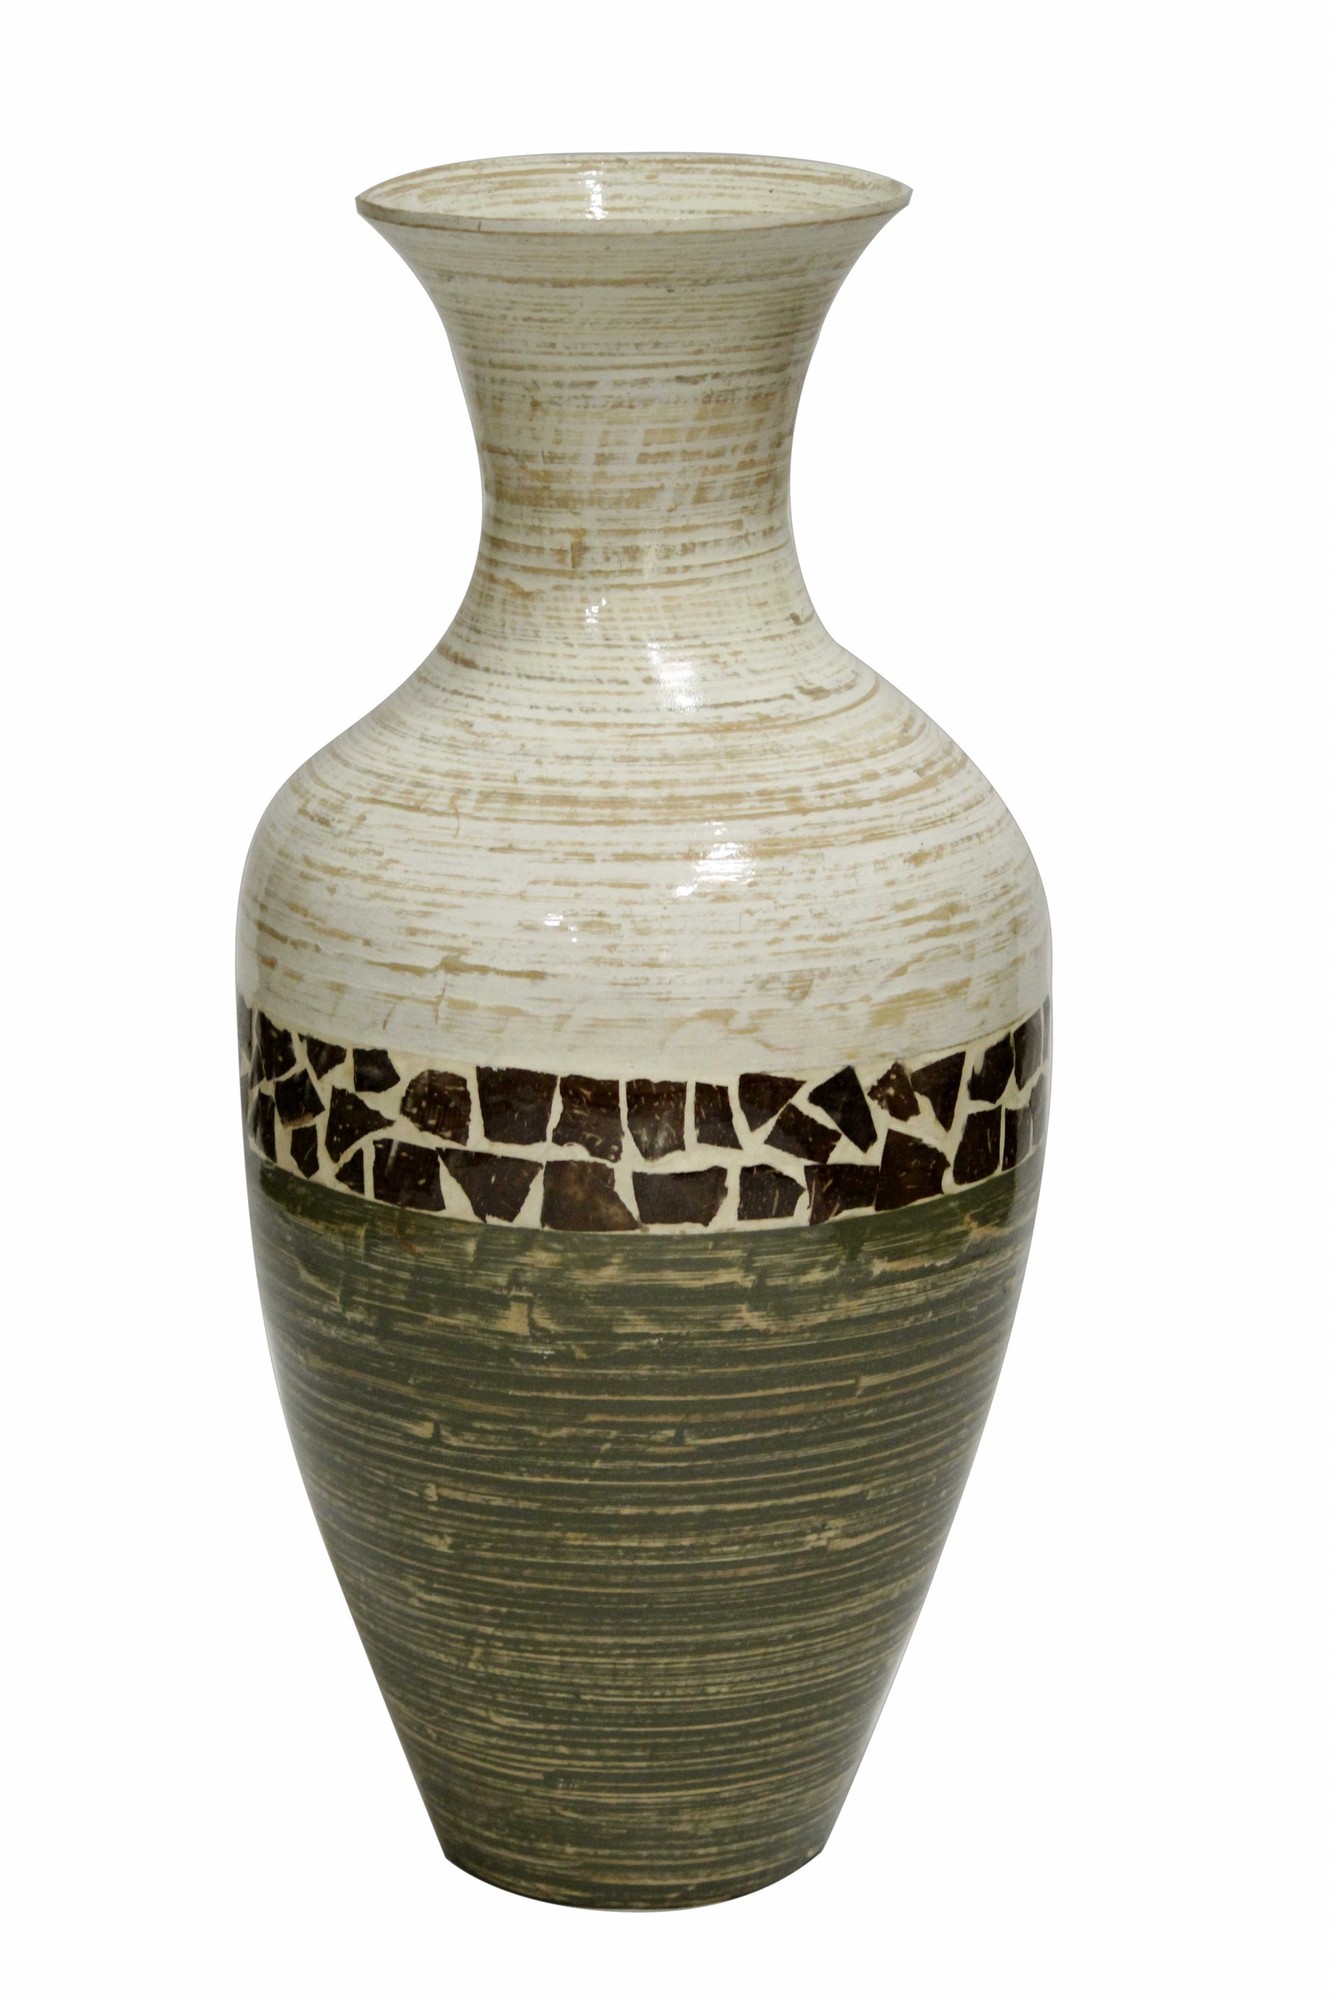 12" X 12" X 25" White And Green W/ Coconut Shell Bamboo Spun Bamboo Floor Vase